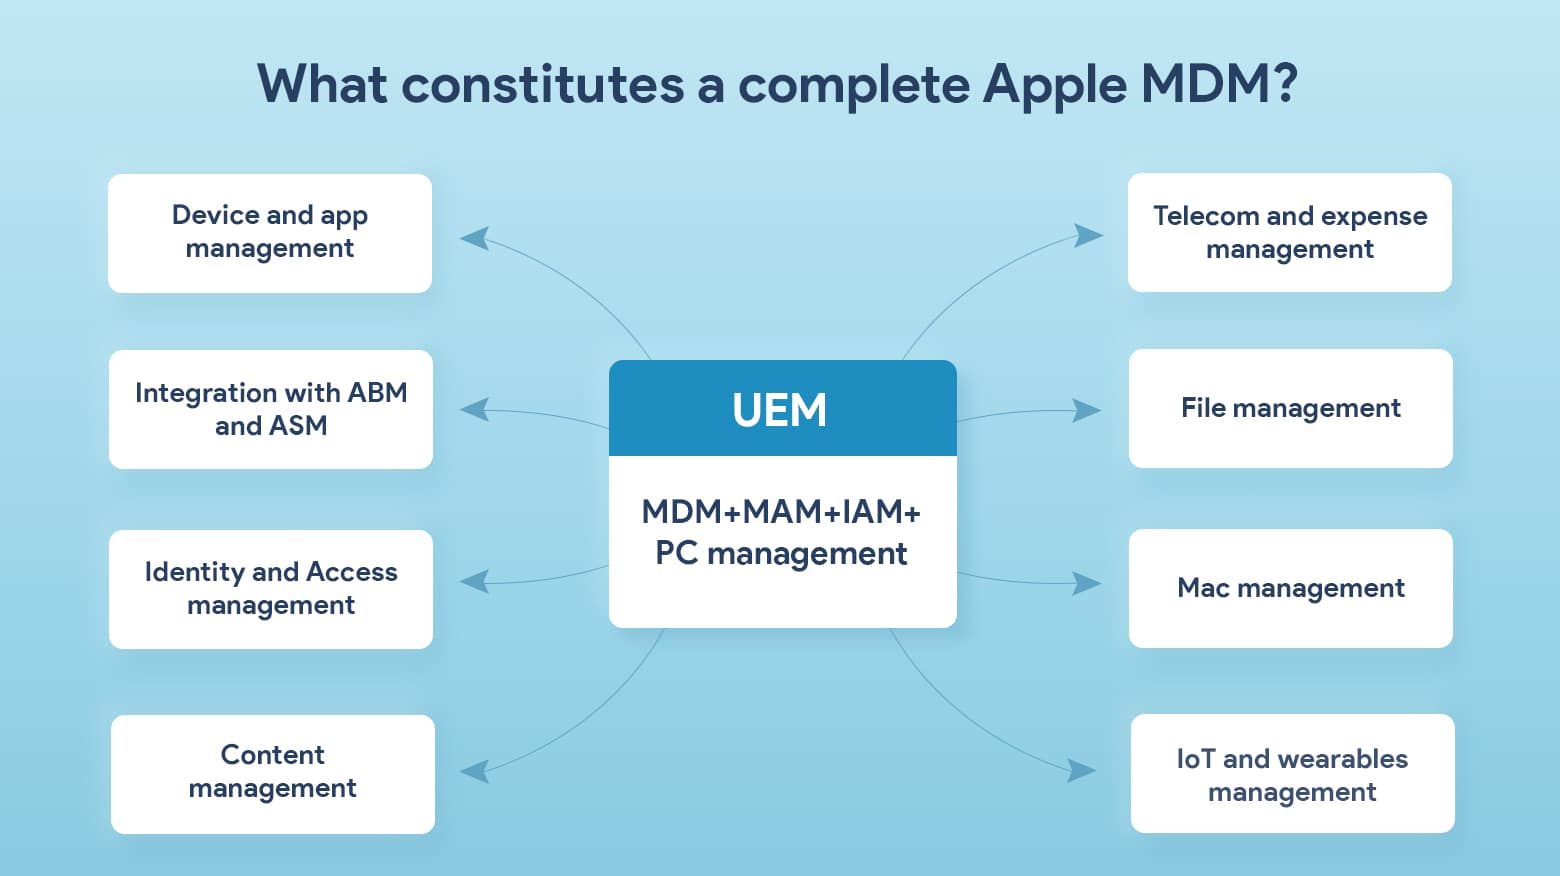 Comprehensive Apple MDM involves many moving parts, making a complete solution essential